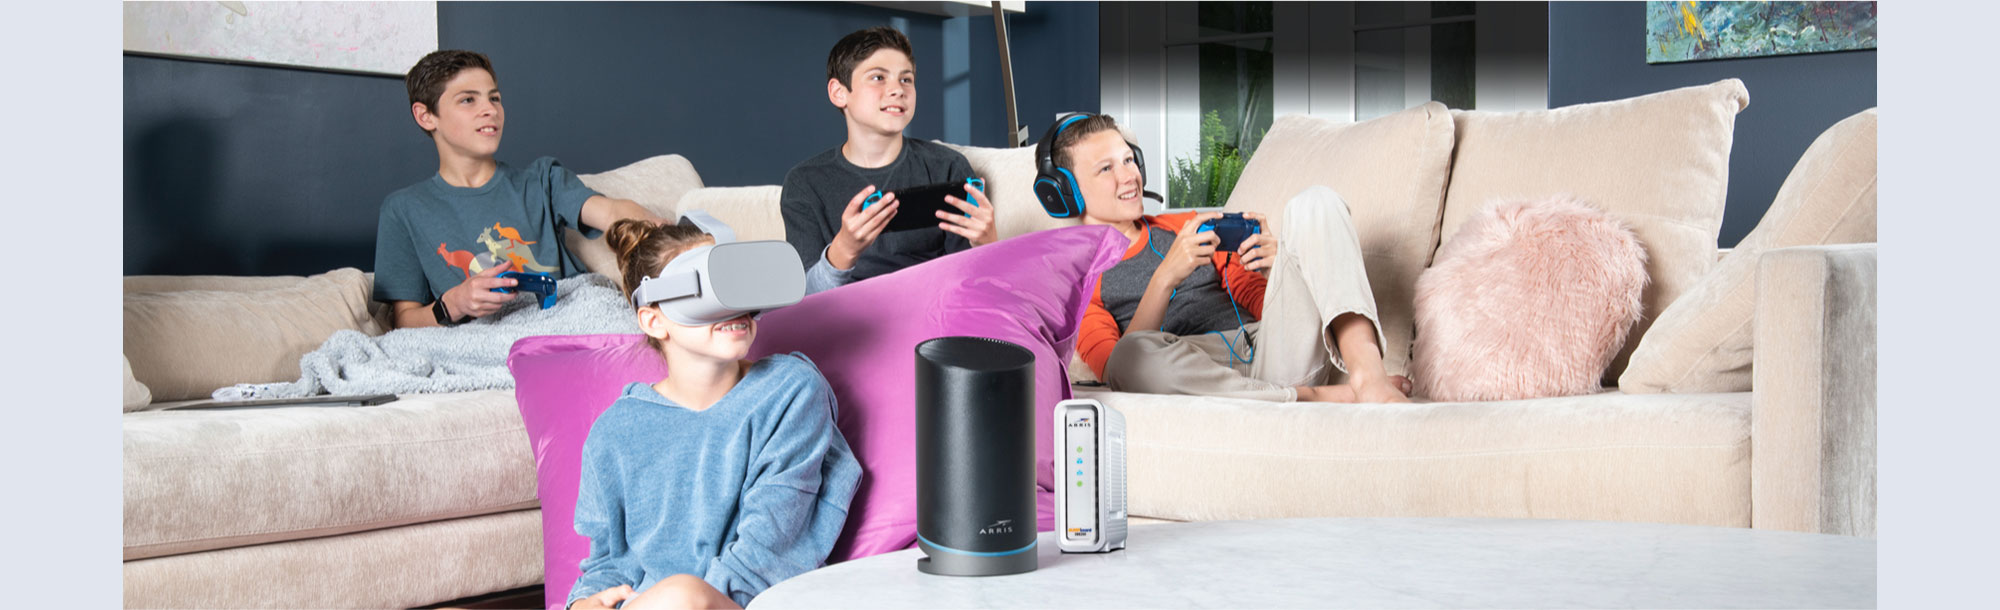 Video gaming with Wi-Fi system